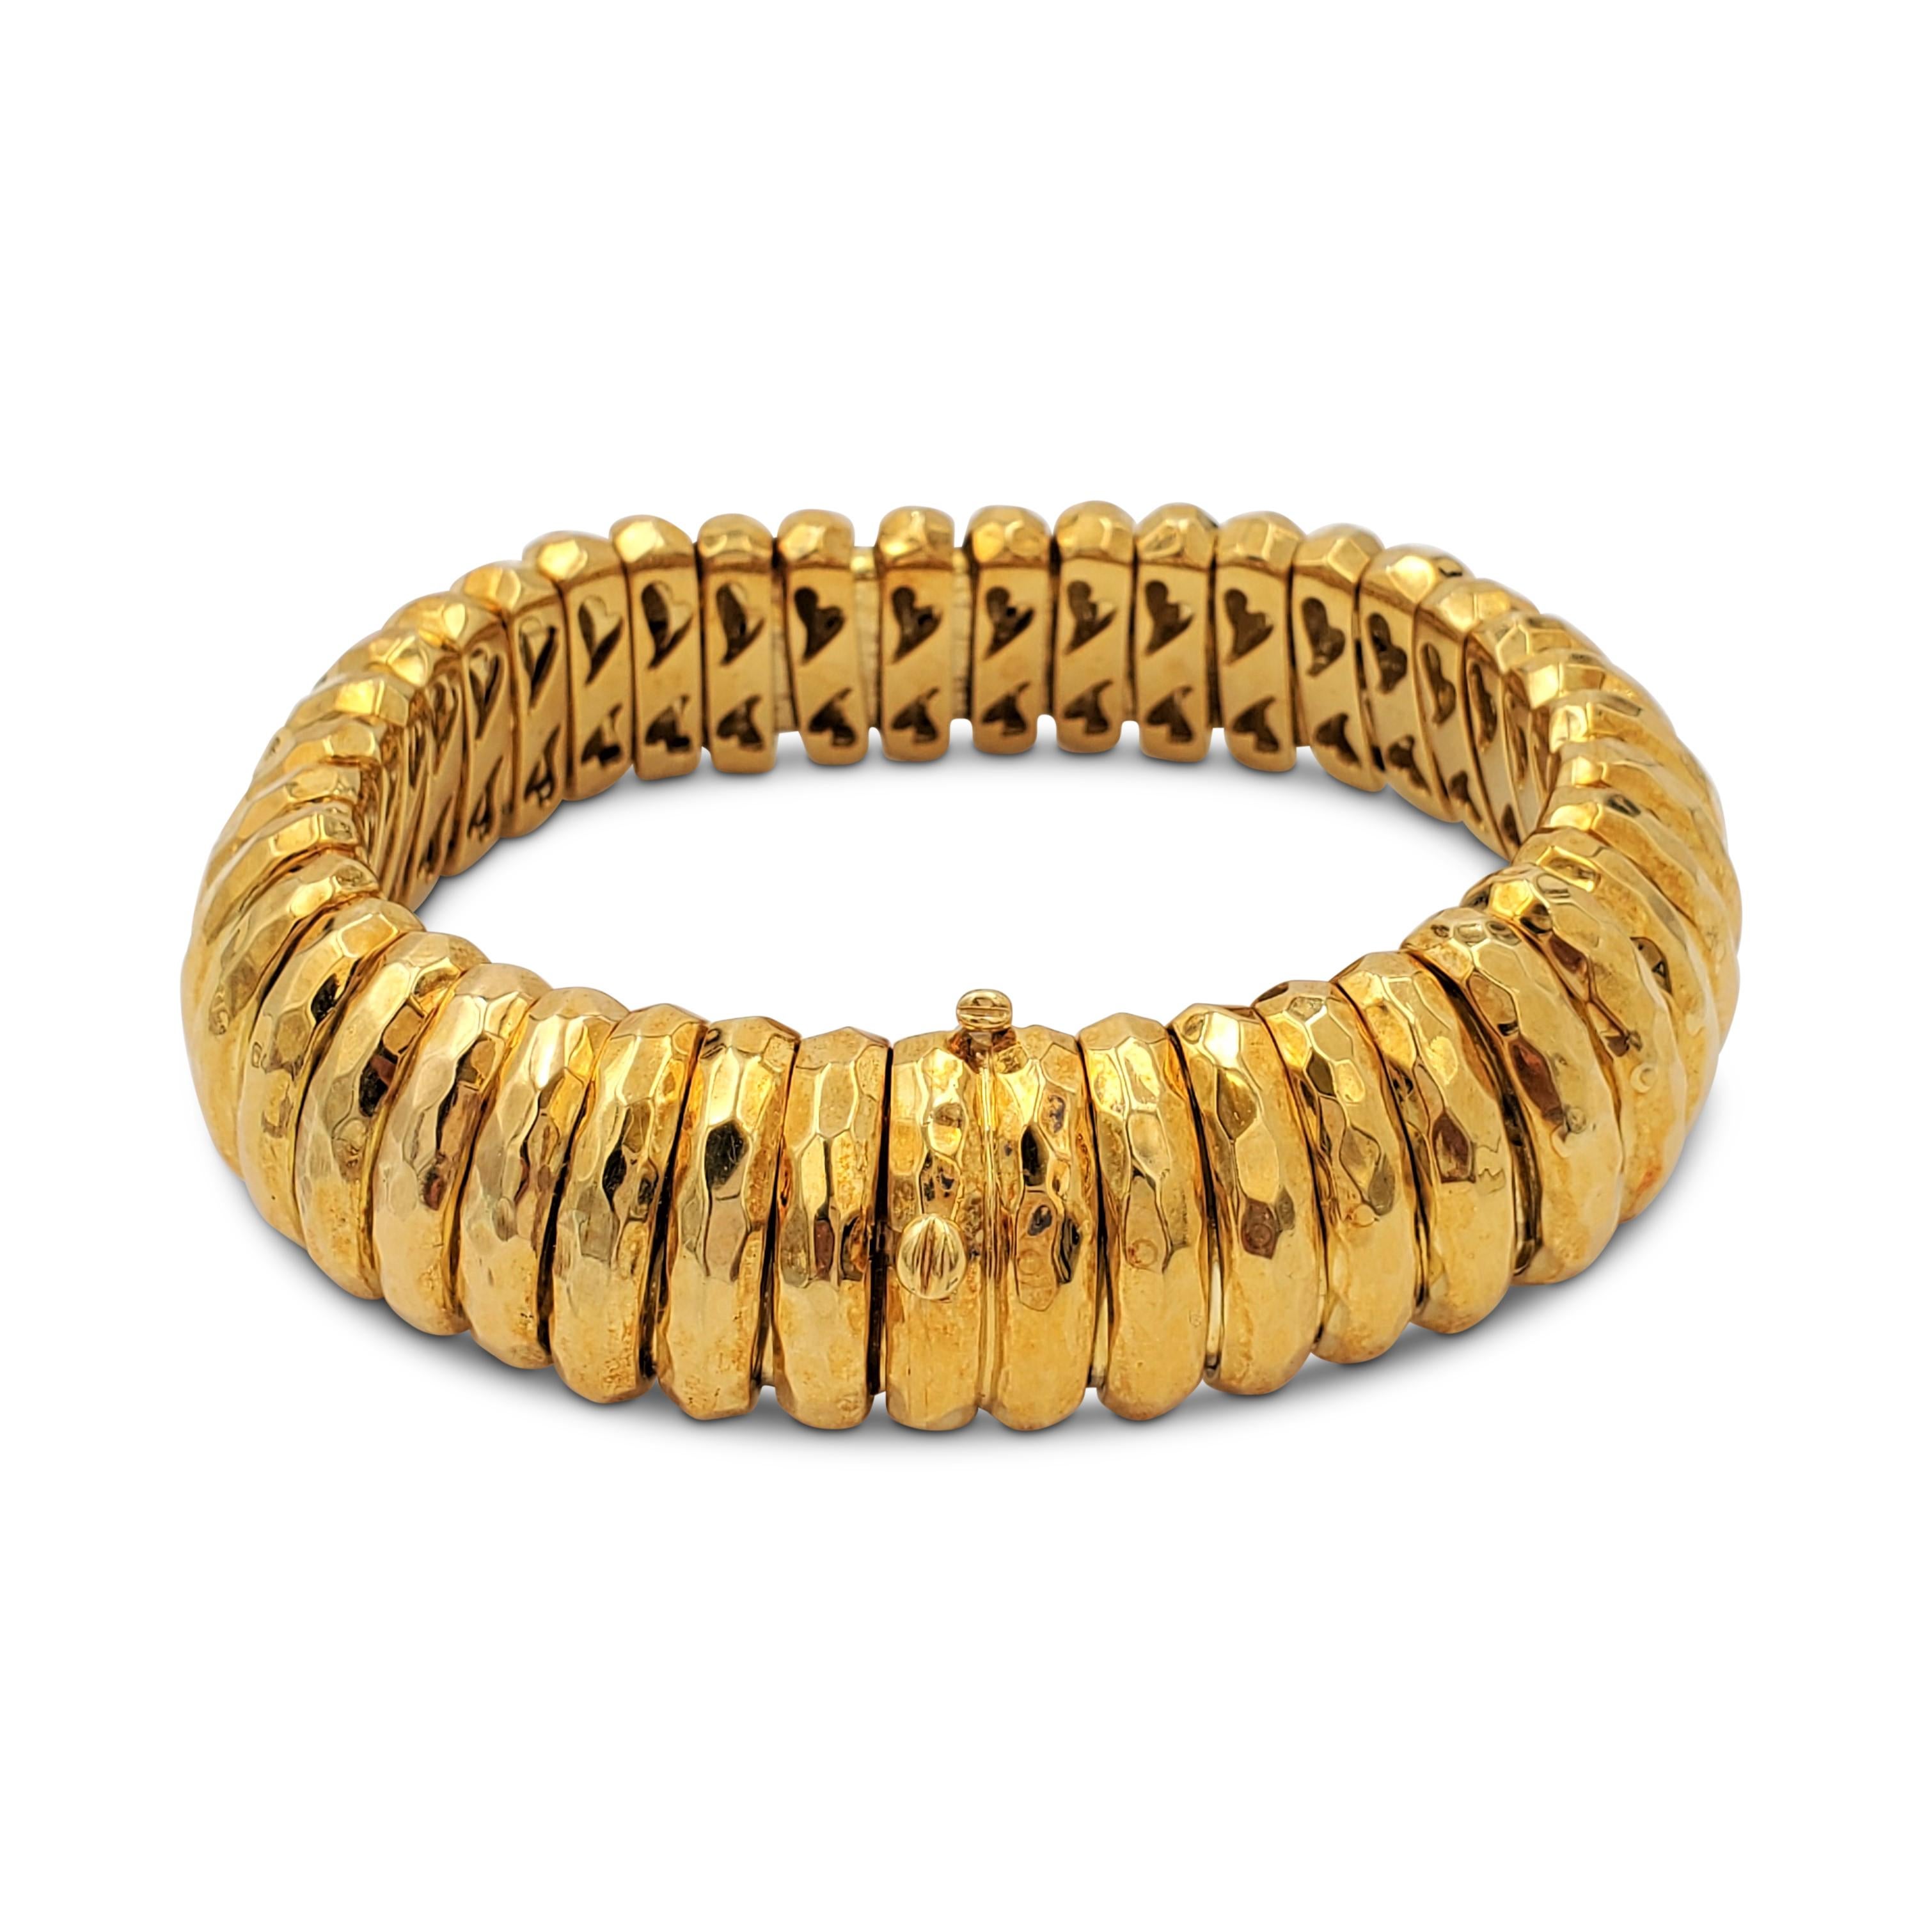 Authentic Henry Dunay bracelet crafted in 18 karat hammered gold.  Bracelet measures 8 3/4 inches in length and 3/4 inch in width with a box clasp. The flexible gold links are in excellent vintage condition and maintain their original patina. Signed